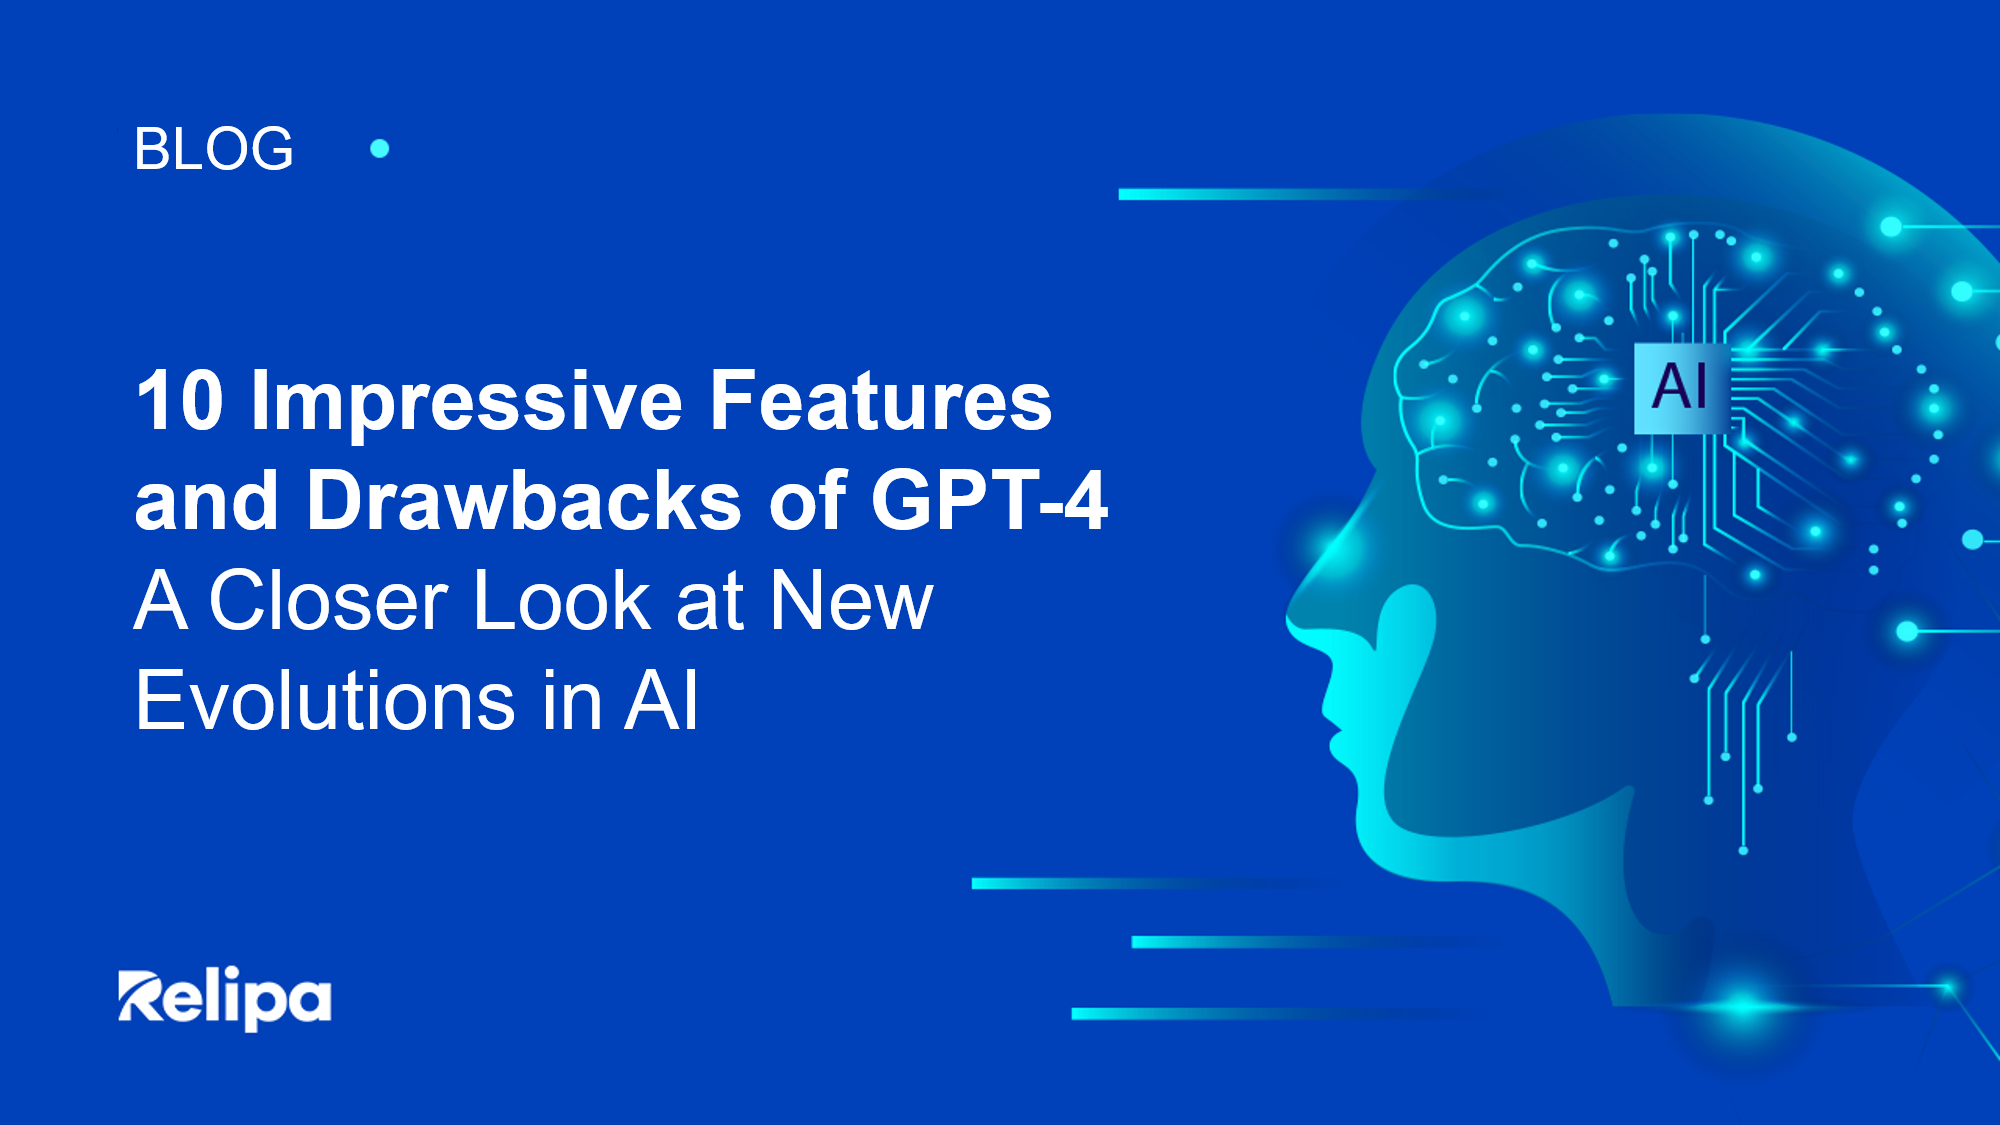 10 Impressive Features and Drawbacks of GPT-4 – A Closer Look at New Evolutions in AI